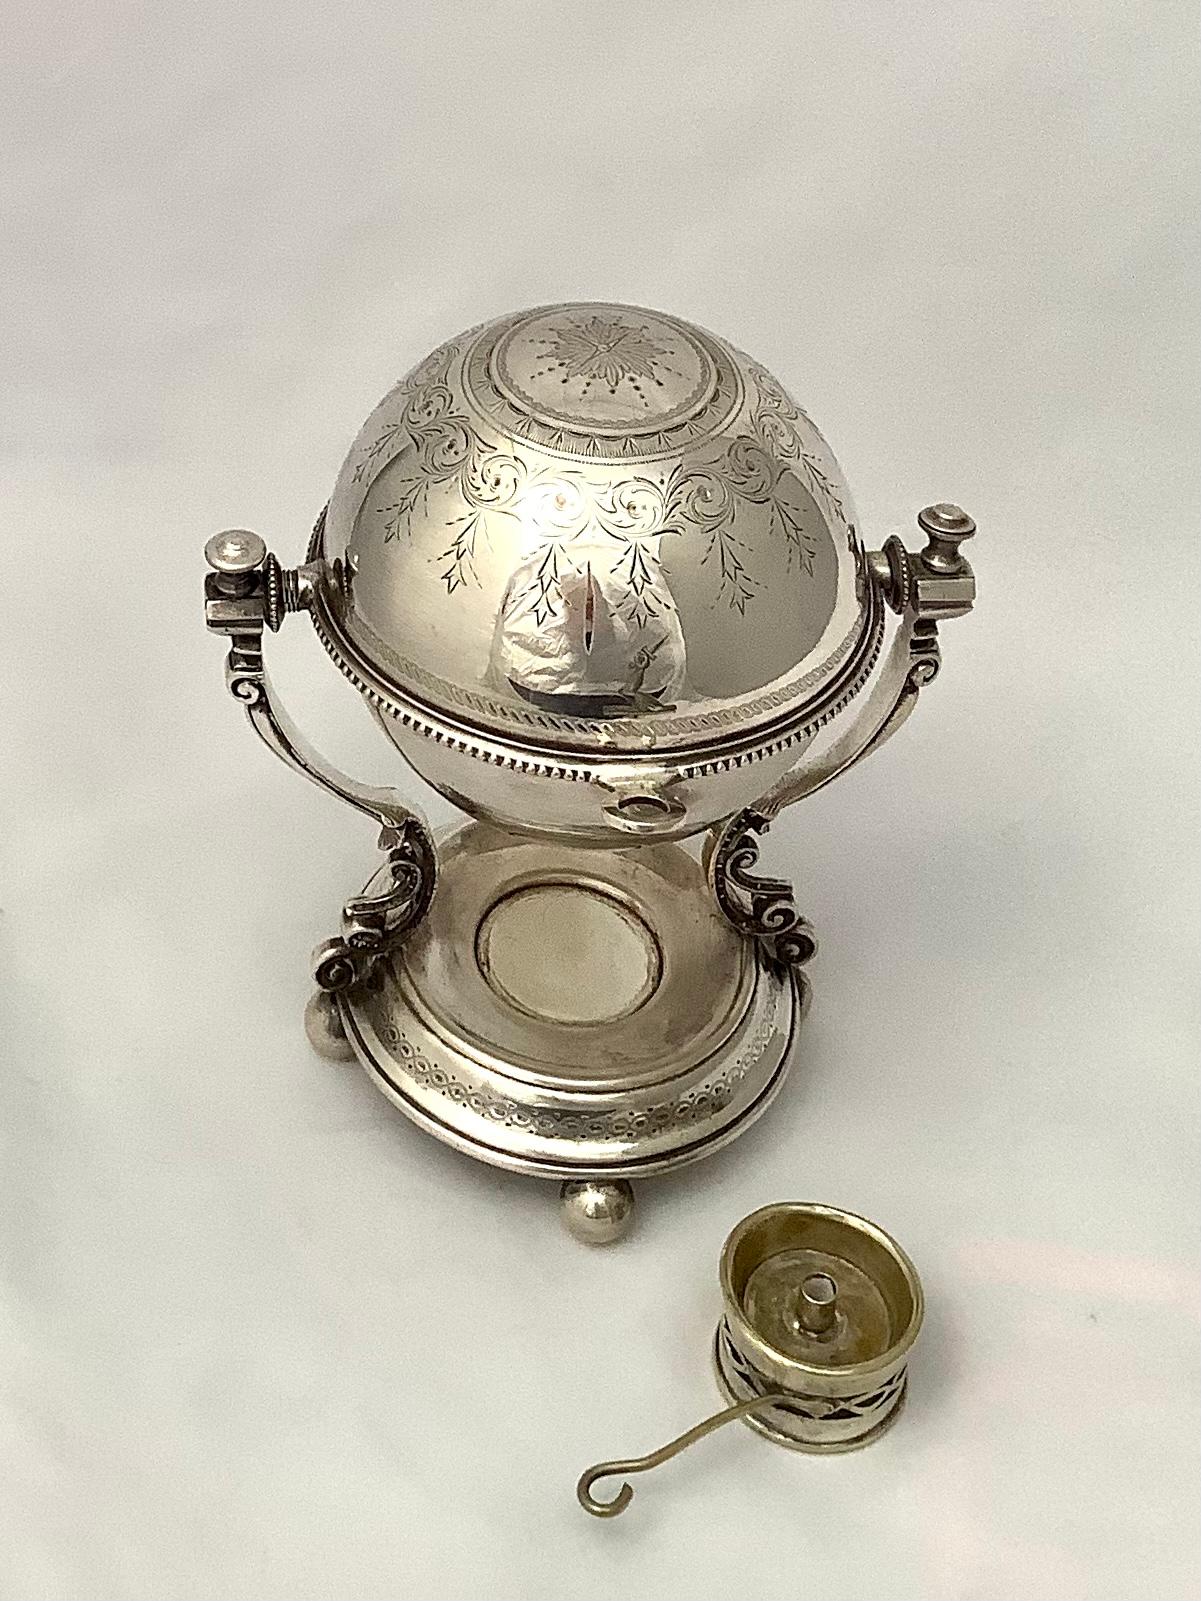 Silver sauce bowl with burner. This beautiful piece is finely engraved throughout. It is perfect to serve a warm sauce in this lidded serving dish with burner. My client used this piece for her powder room soap. It was perfect.